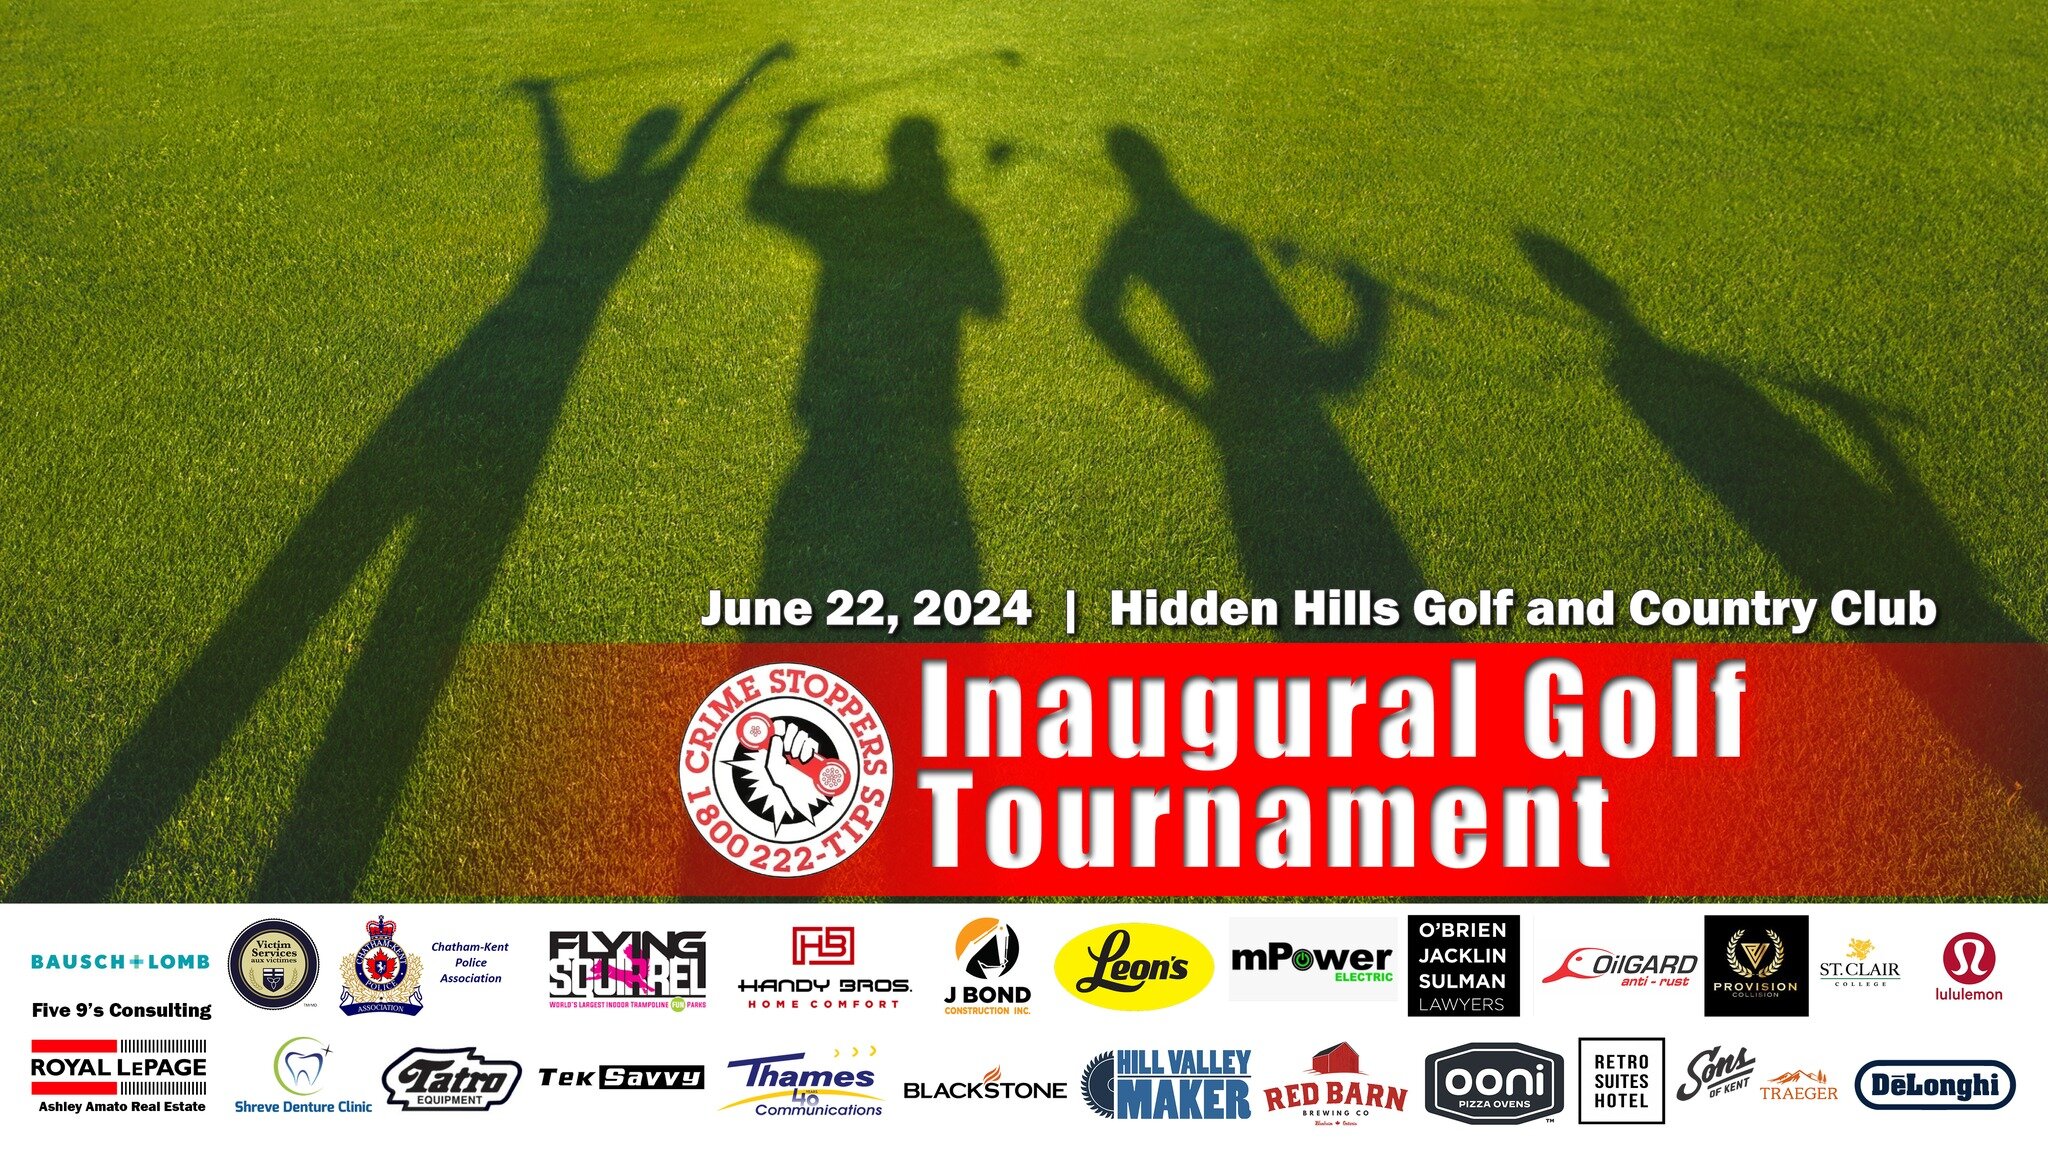 2024 Chatham-Kent Crime Stoppers Inaugural Golf Tournament
Book your team of four NOW: https://www.ckcrimestoppers.ca/

June 22, 2024 | 8:00 AM - 5:00 PM
Hidden Hills Golf and Country Club
Following the round of golf, you are invited to join us for d